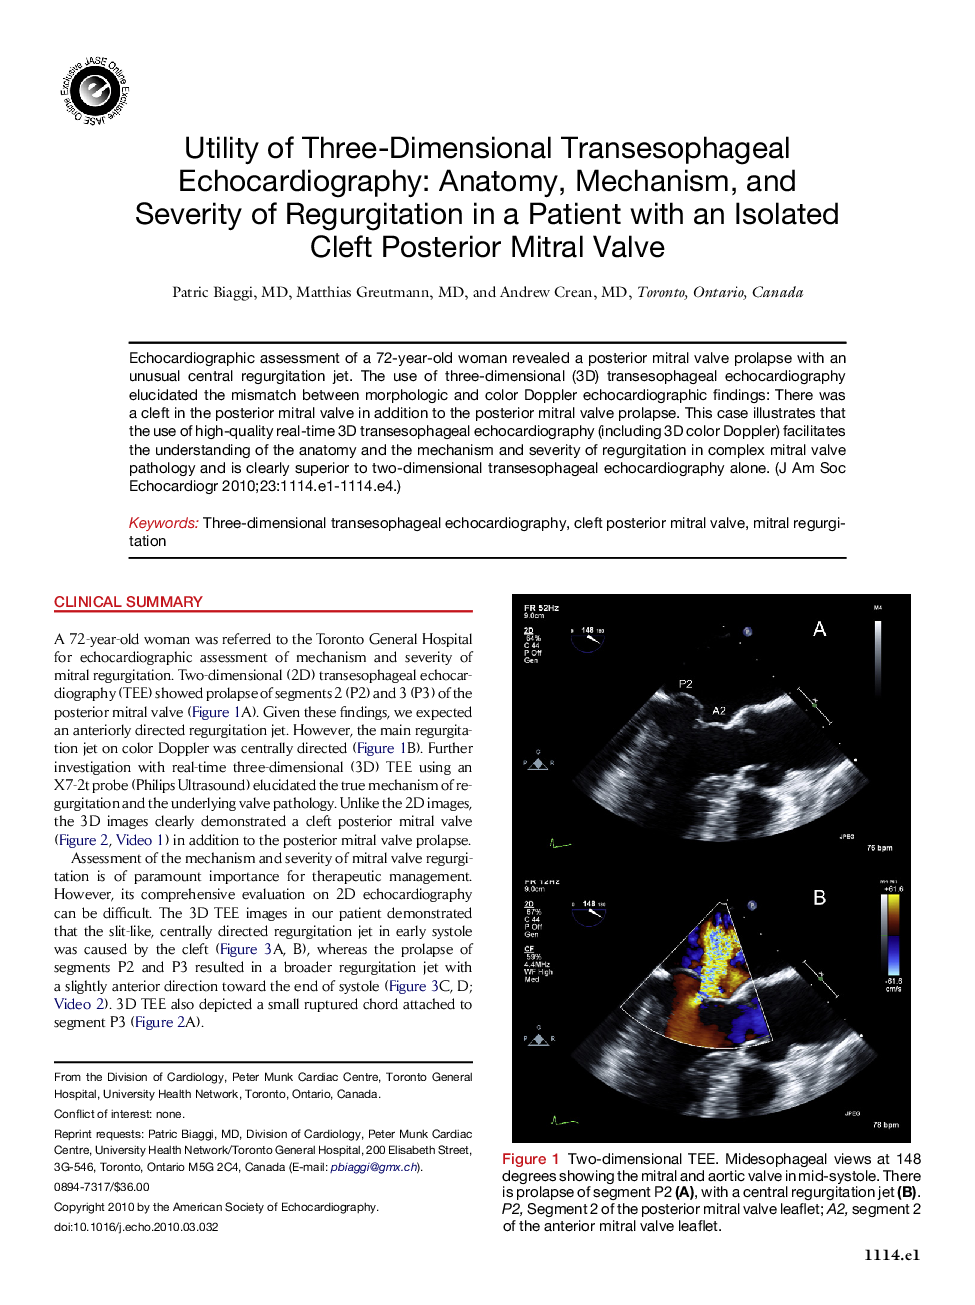 Utility of Three-Dimensional Transesophageal Echocardiography: Anatomy, Mechanism, and Severity of Regurgitation in a Patient with an Isolated Cleft Posterior Mitral Valve